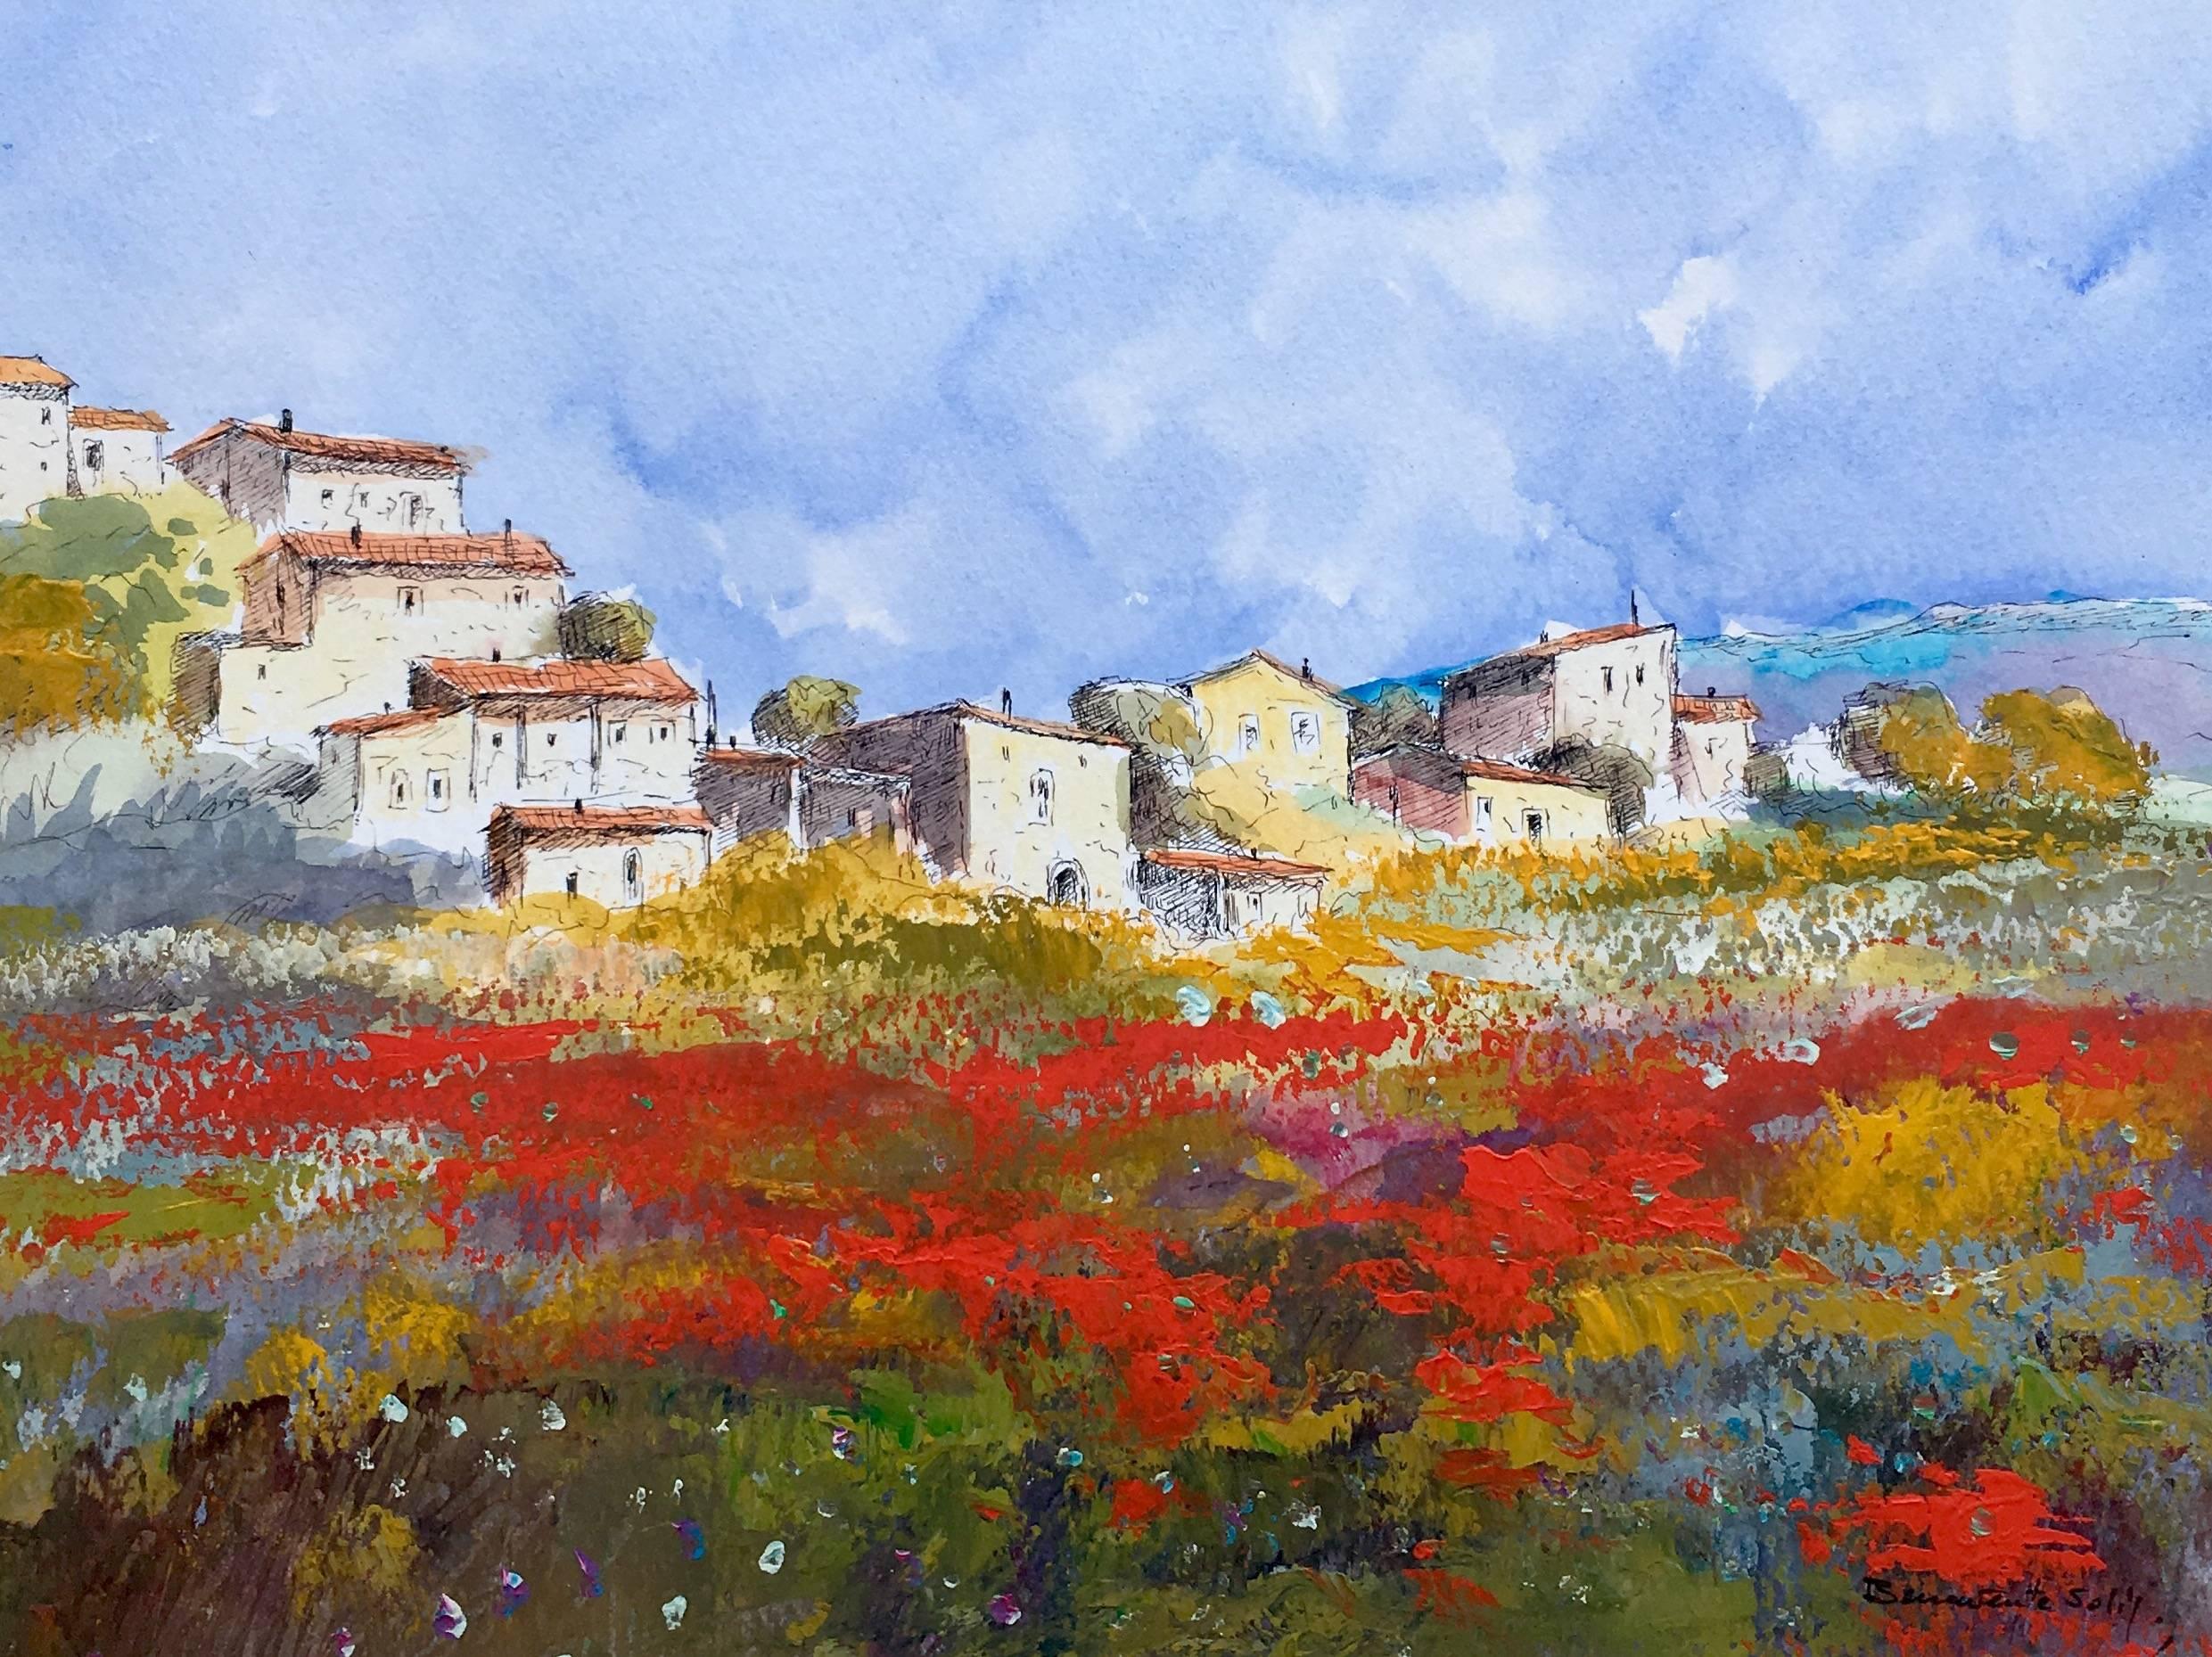 Benaavente Solis.  home. field. poppies.  Mallorca- original expressionist  - Painting by Benavente Solis